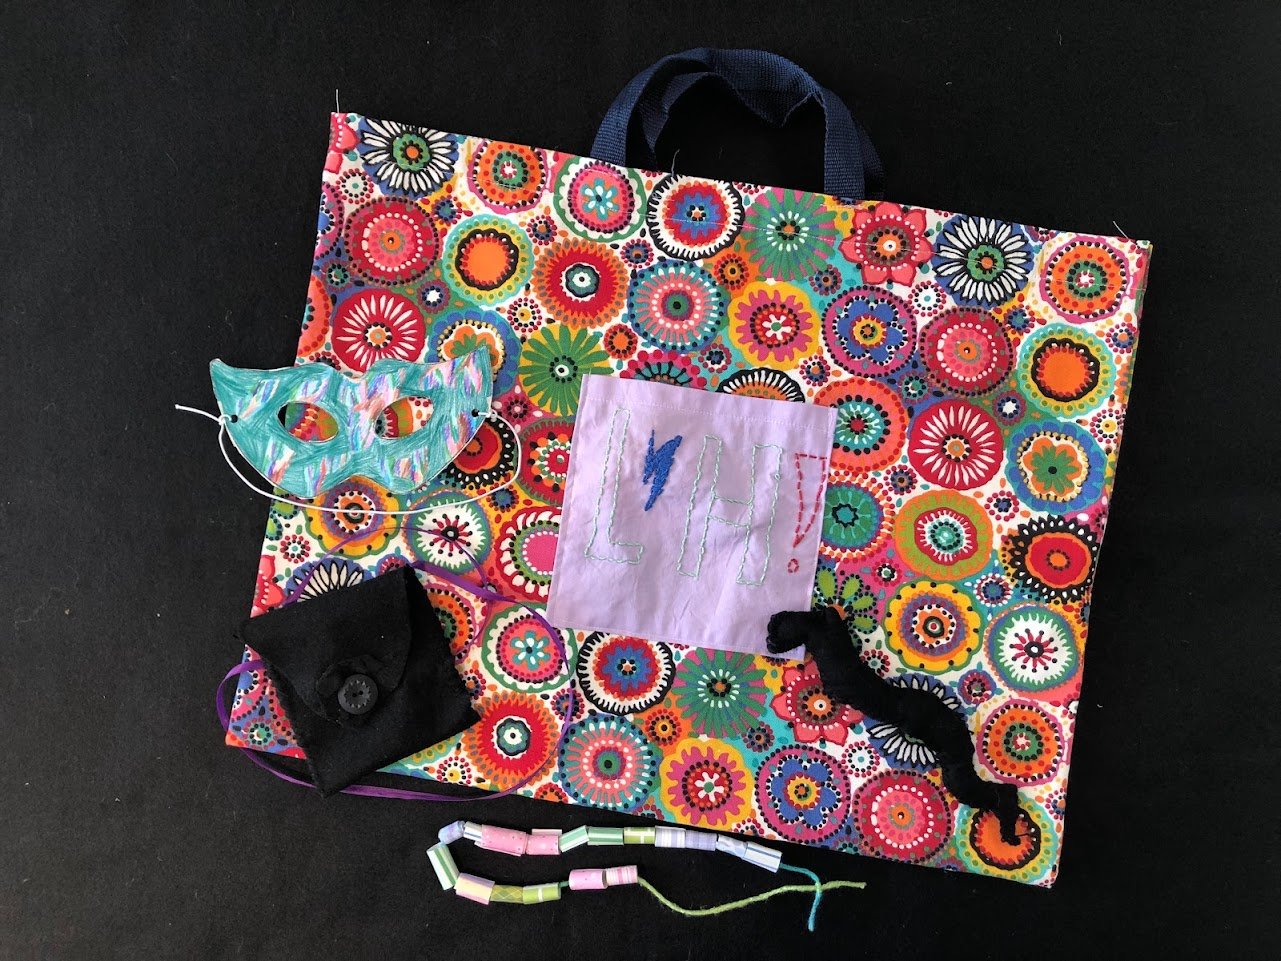 LH's  Tote with embroidered pocket, Pocket Pouch, Eye Mask, and Paper Bead necklace